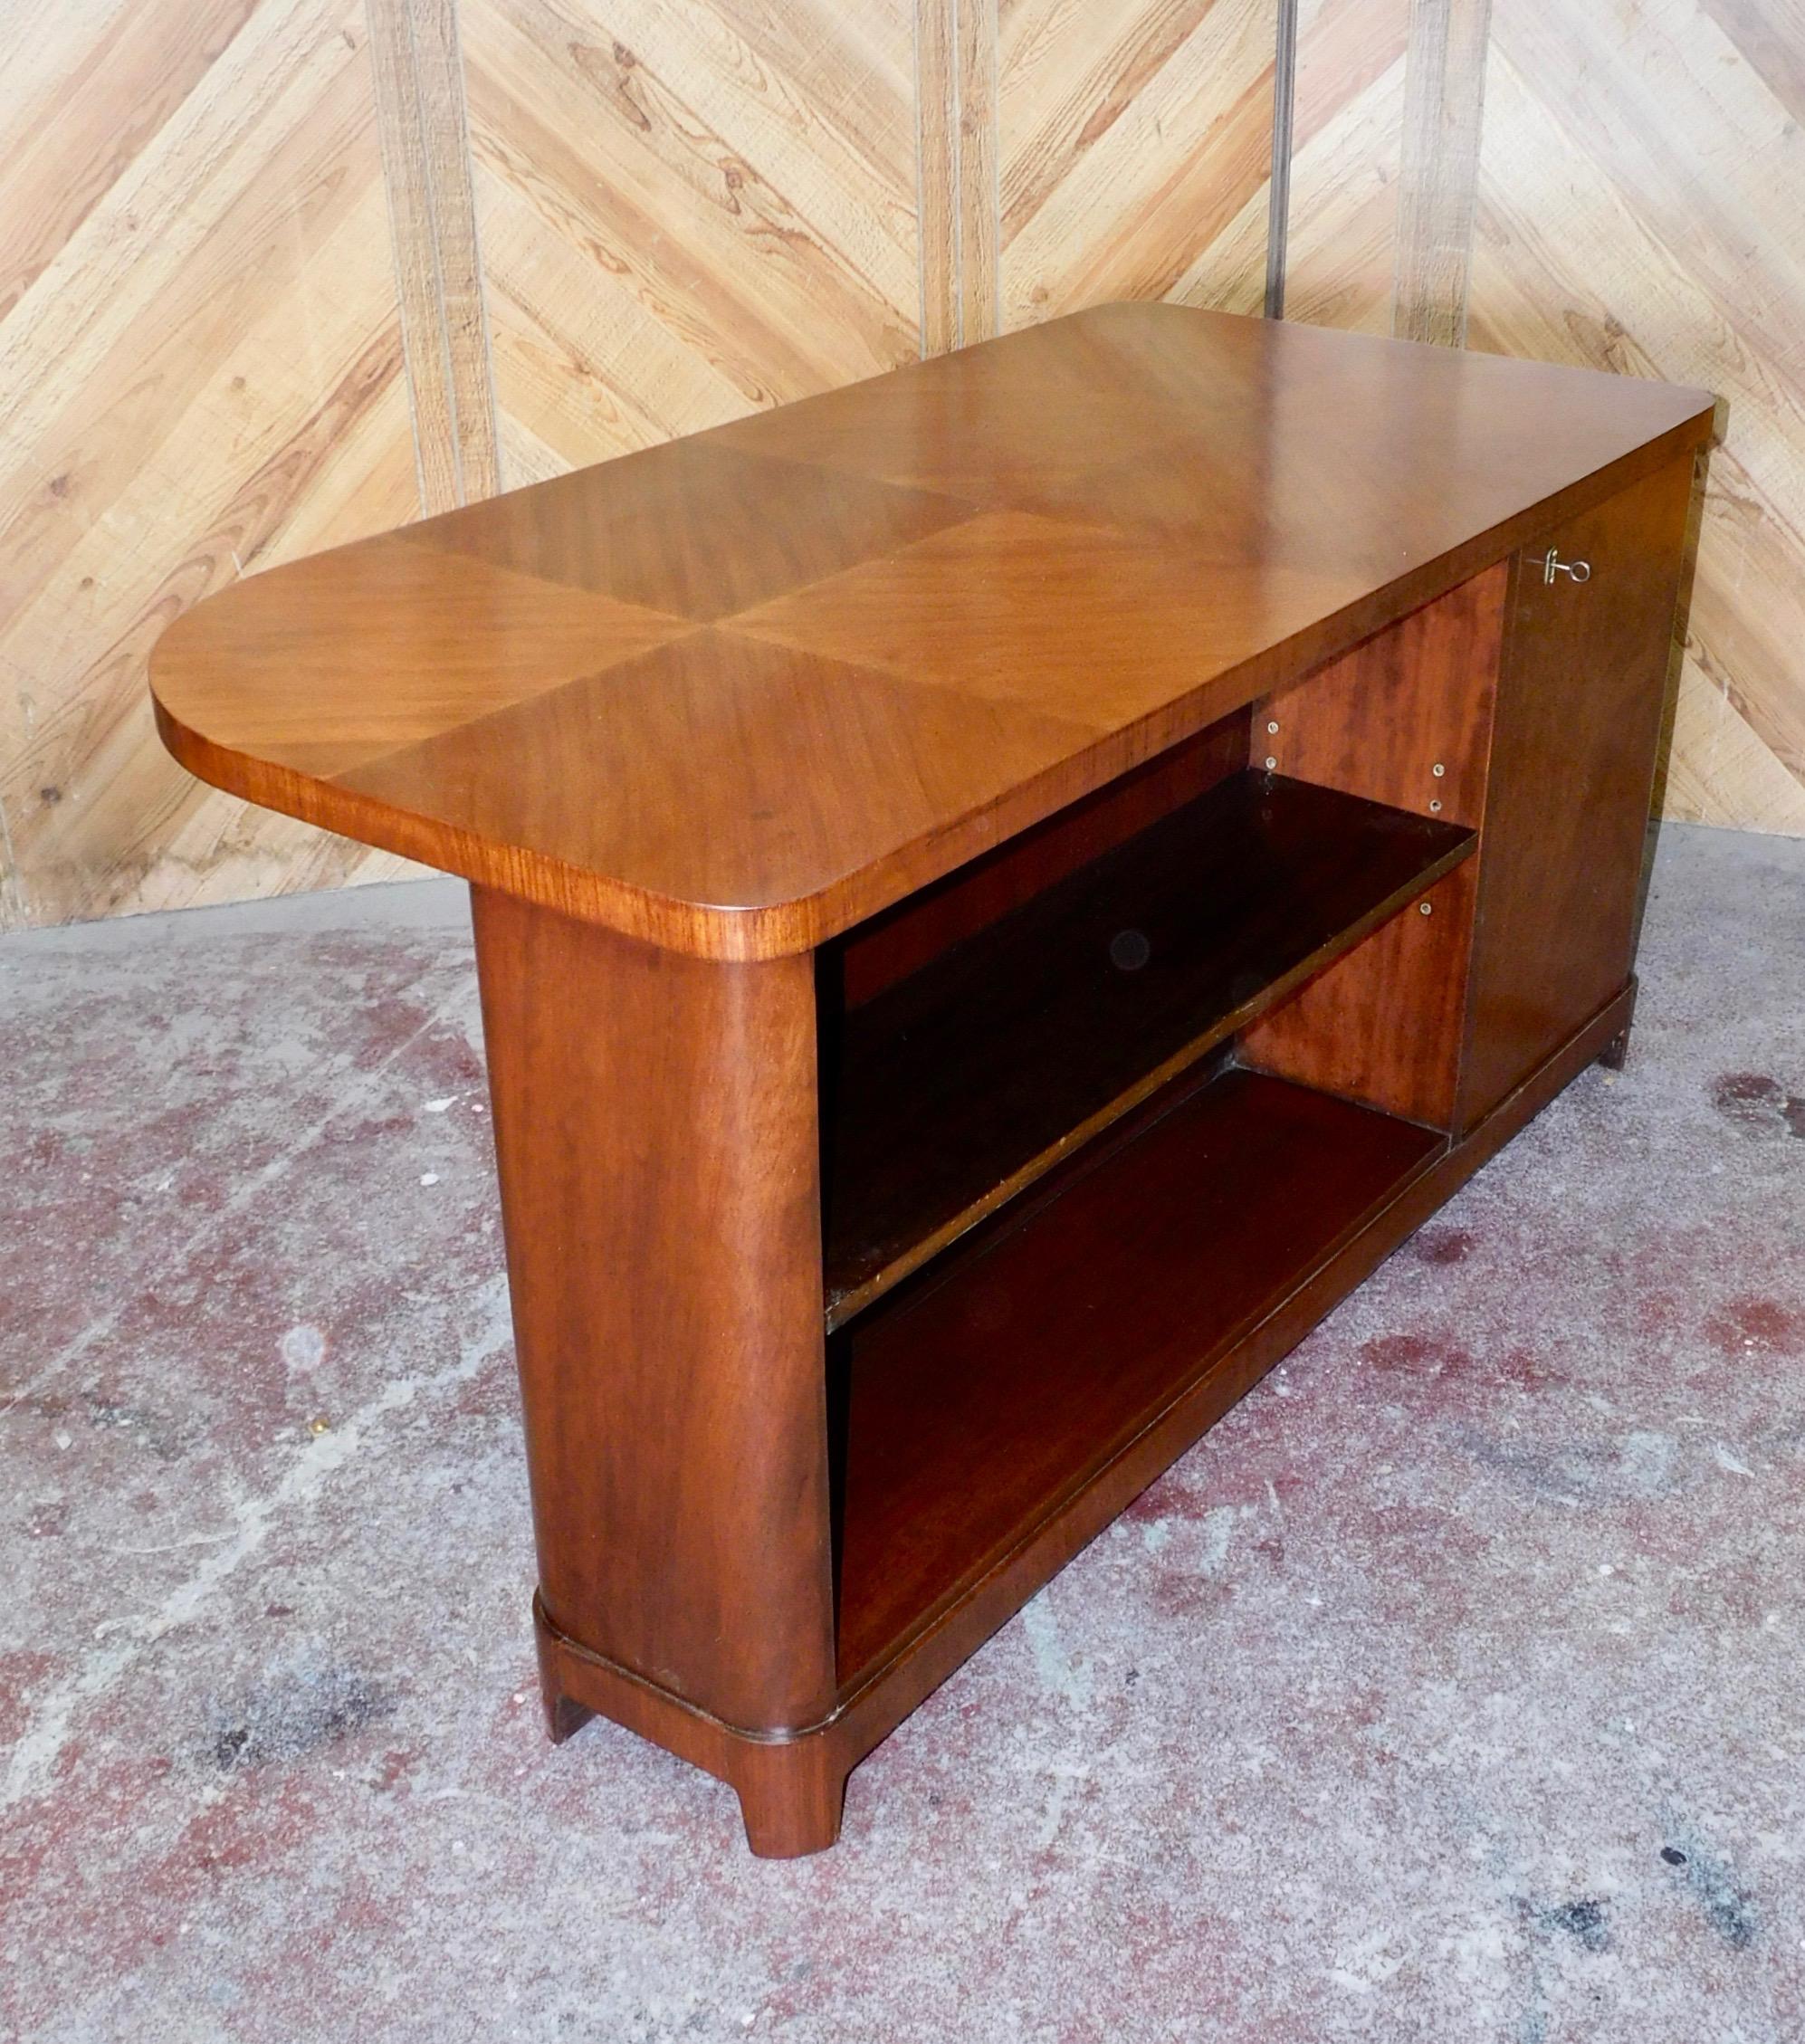 Swedish Art Moderne Desk in Flame Mahogany with Built-In Bookcase, circa 1940 For Sale 11